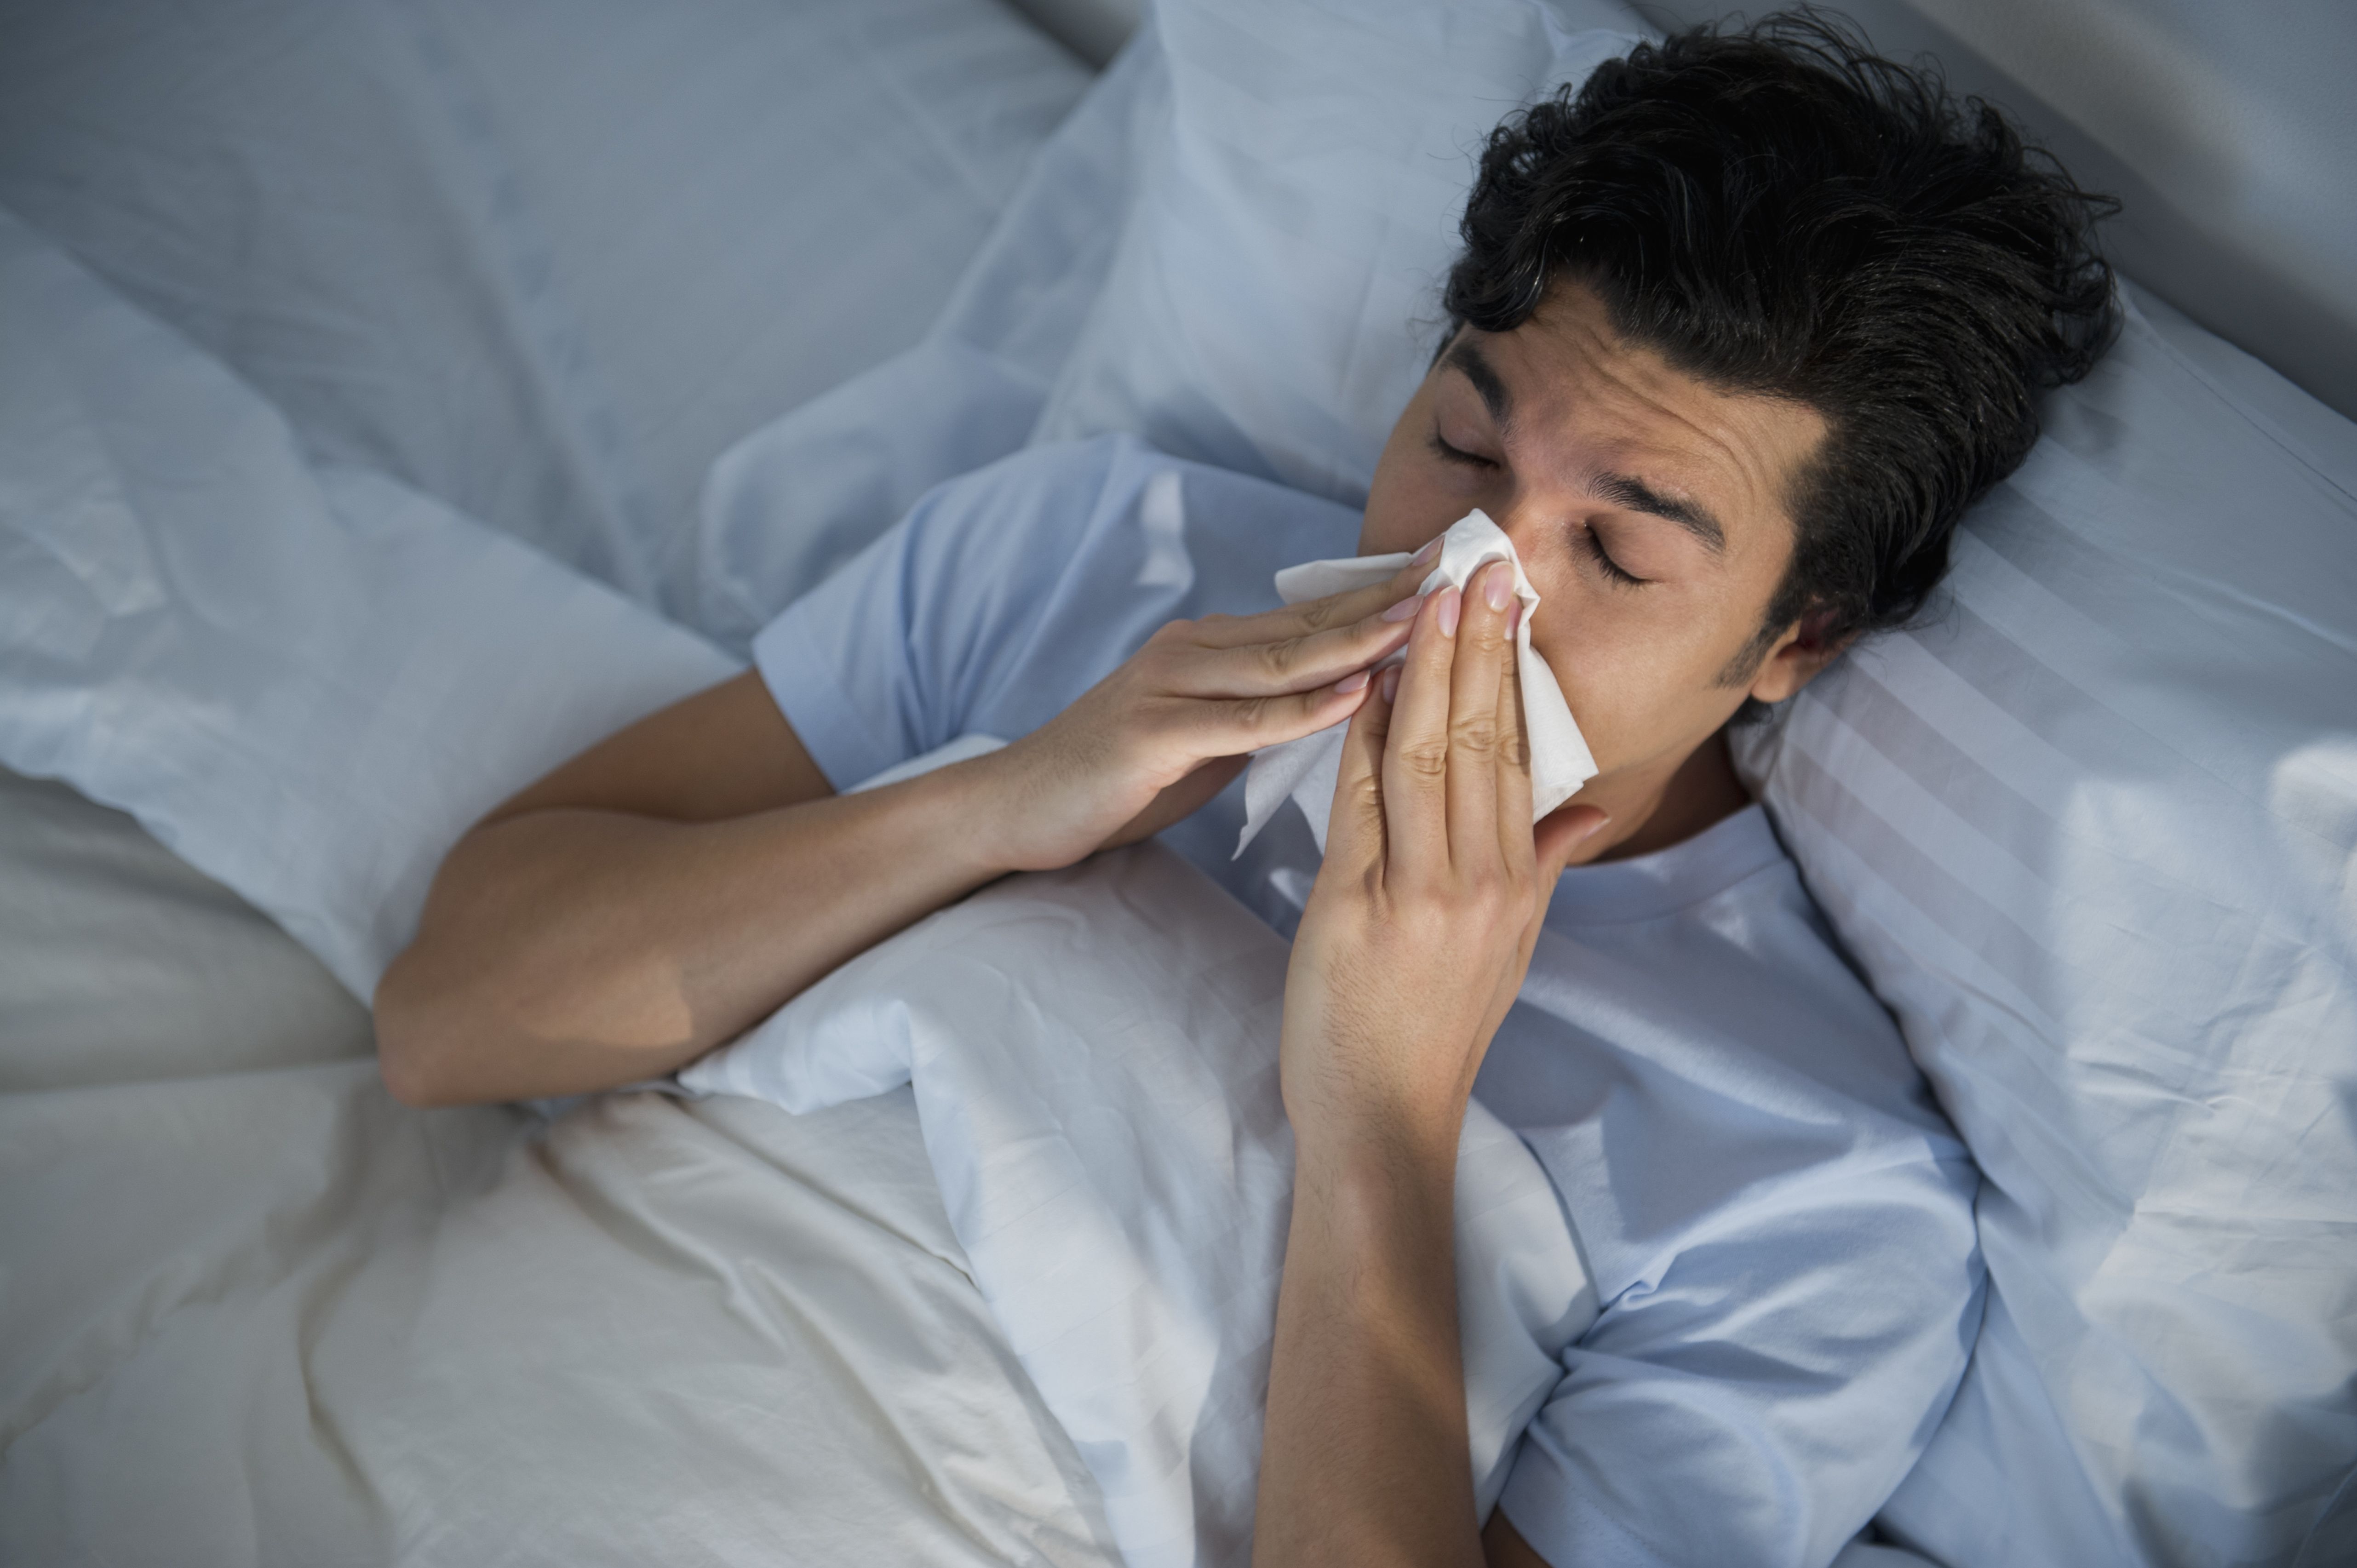 How To Clear Up A Blocked Stuffy Nose At Night